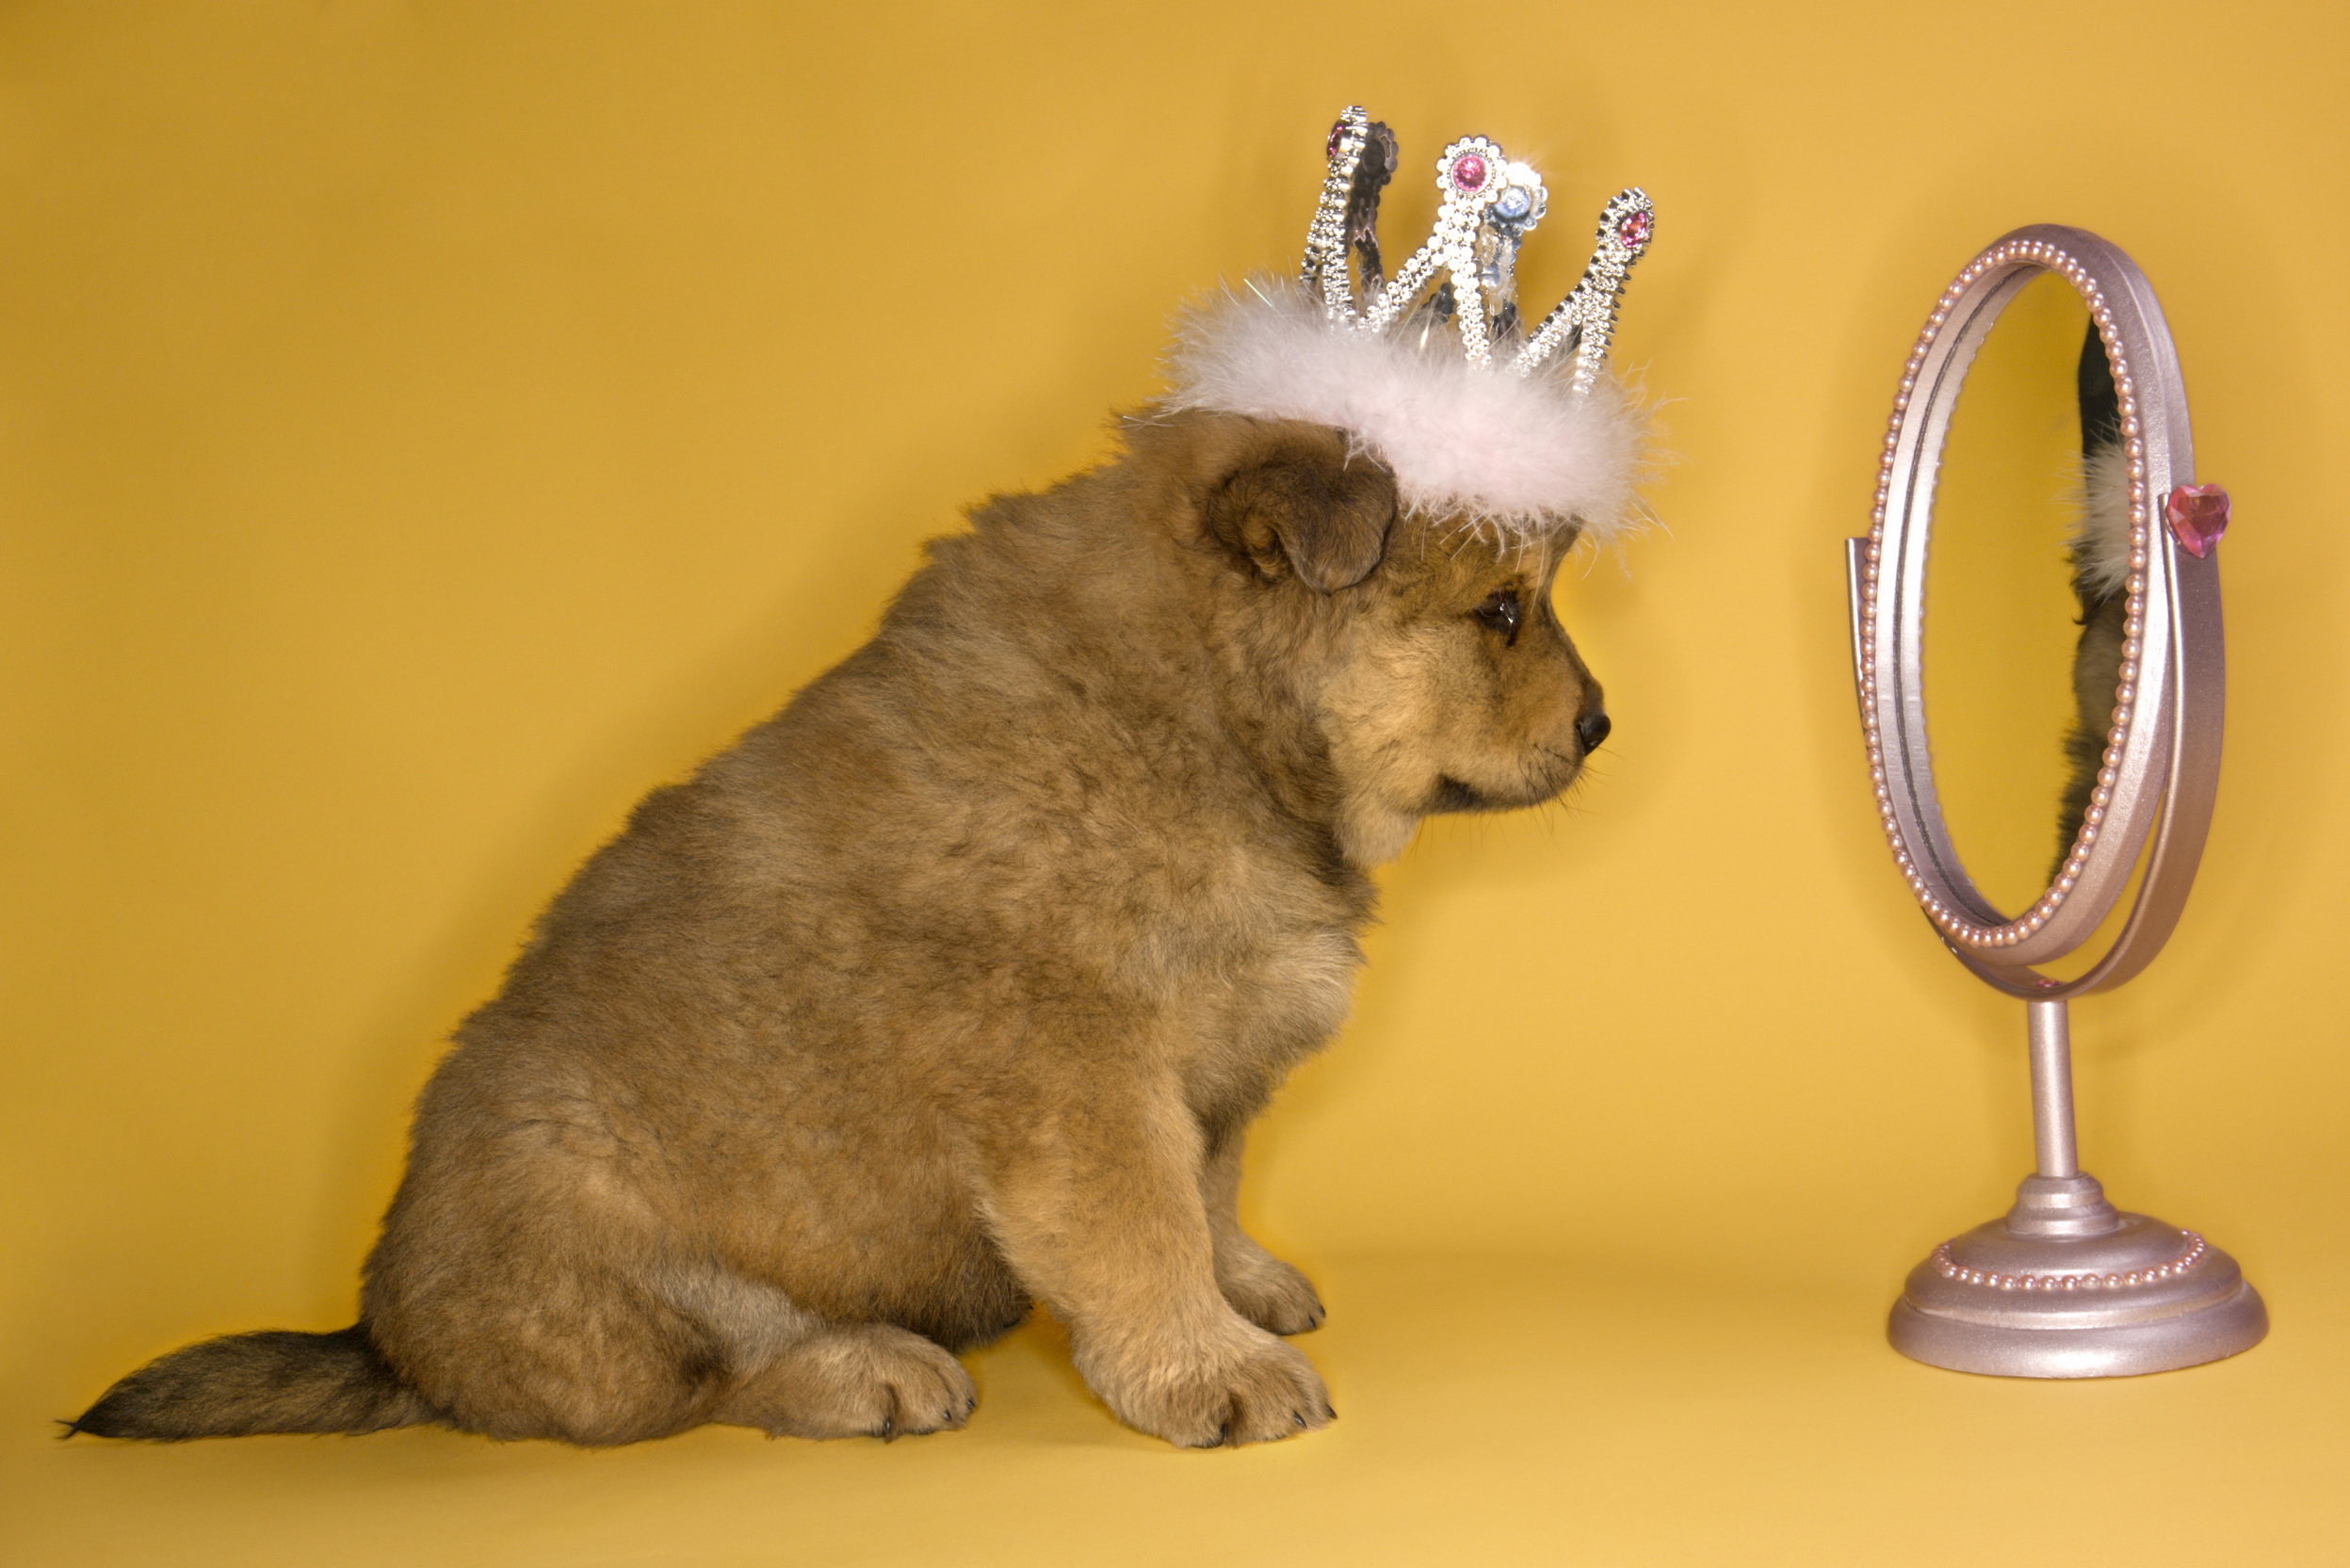 puppy-in-mirror-was-i-raised-by-narcissists